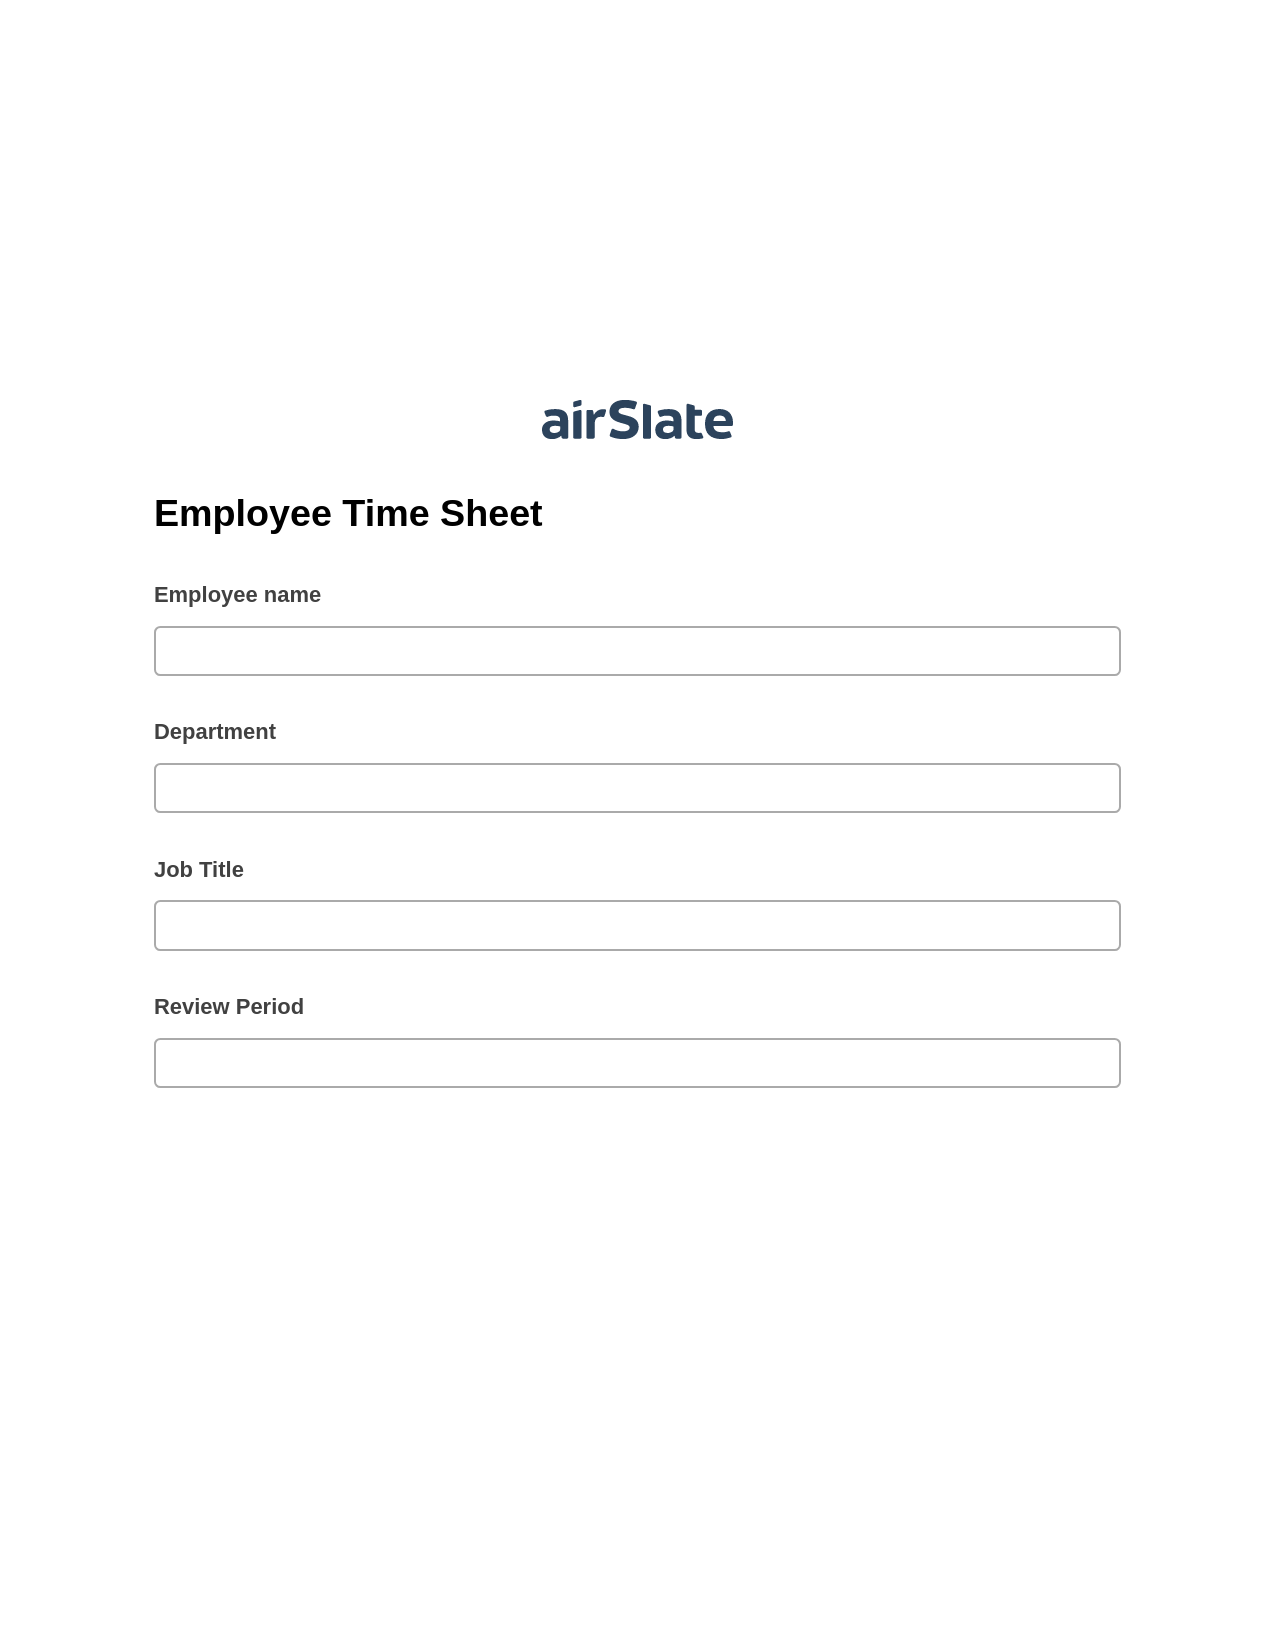 Multirole Employee Time Sheet Pre-fill Dropdowns from Airtable, Add Tags to Slate Bot, Archive to Dropbox Bot